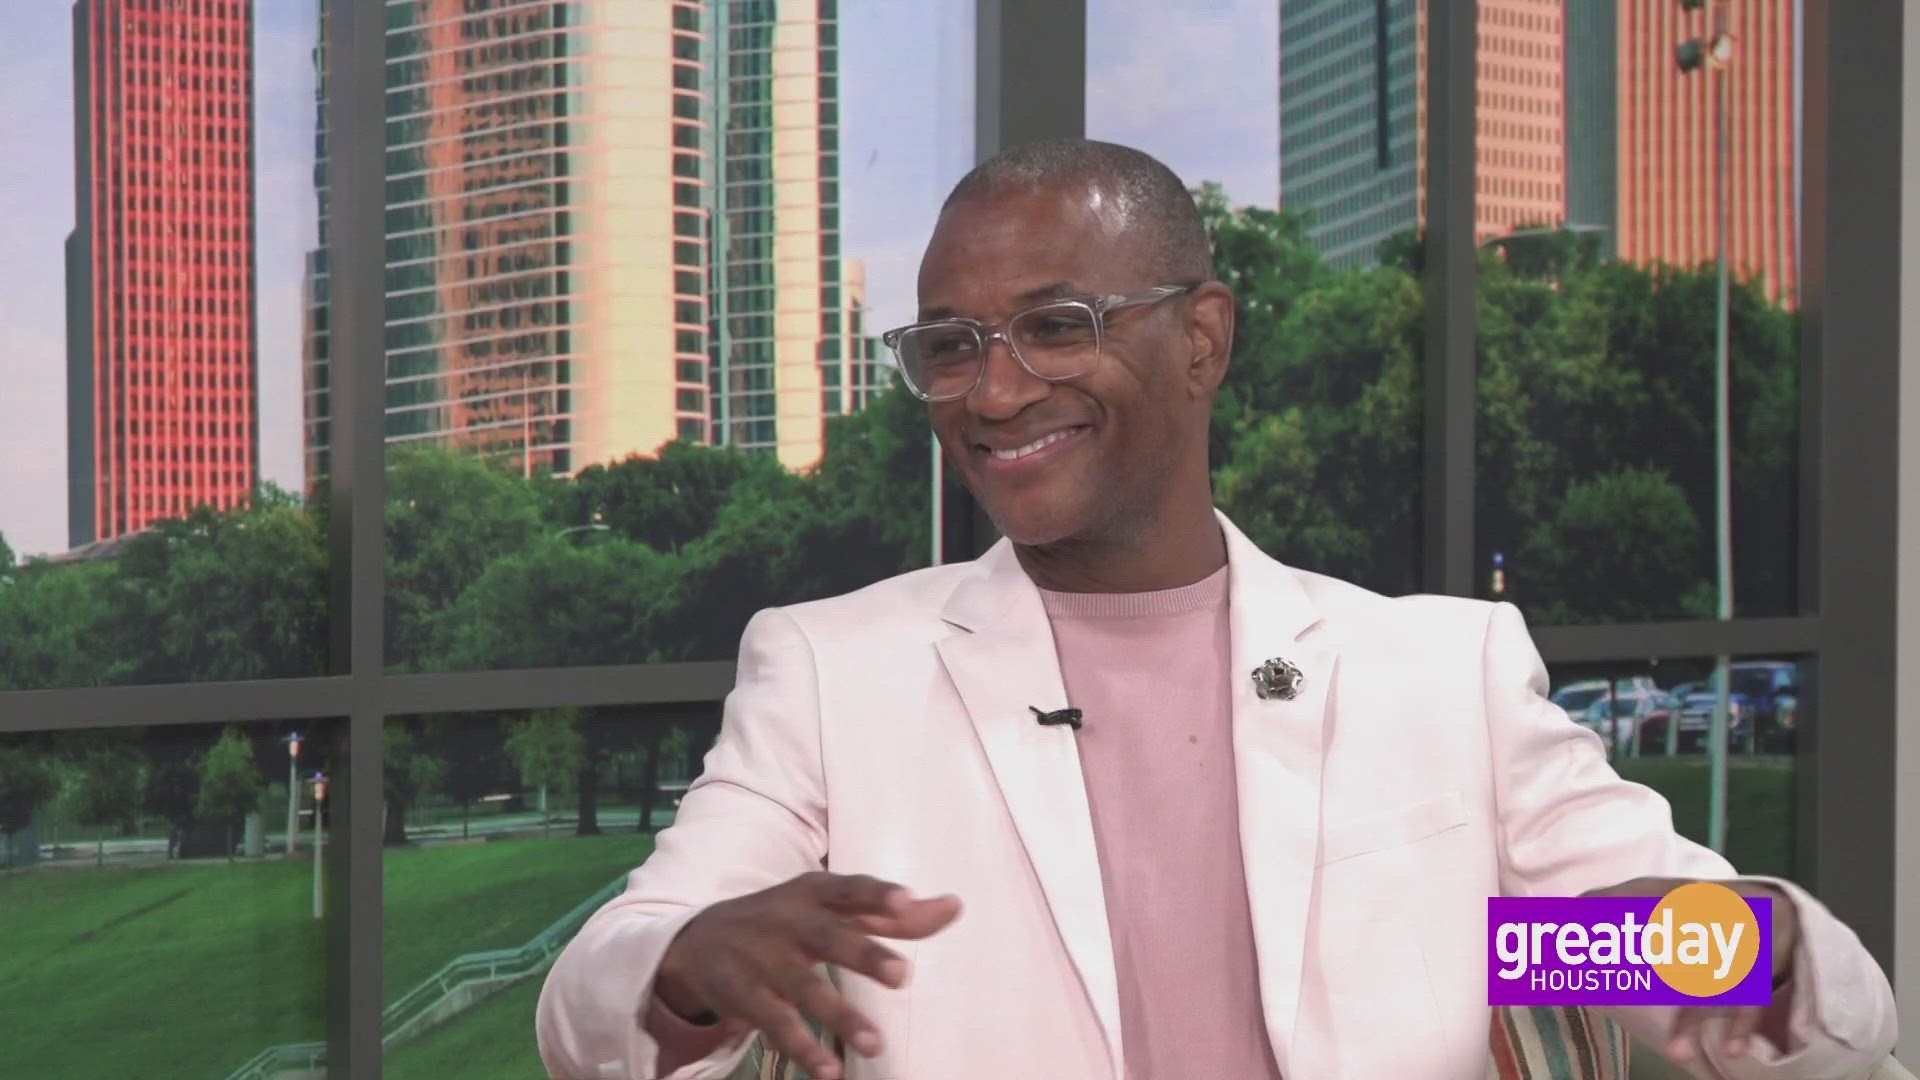 From his run on the groundbreaking comedy show "In Living Color" to movies to the joys of Fatherhood at age sixty, Tommy Davidson lives life on his terms.